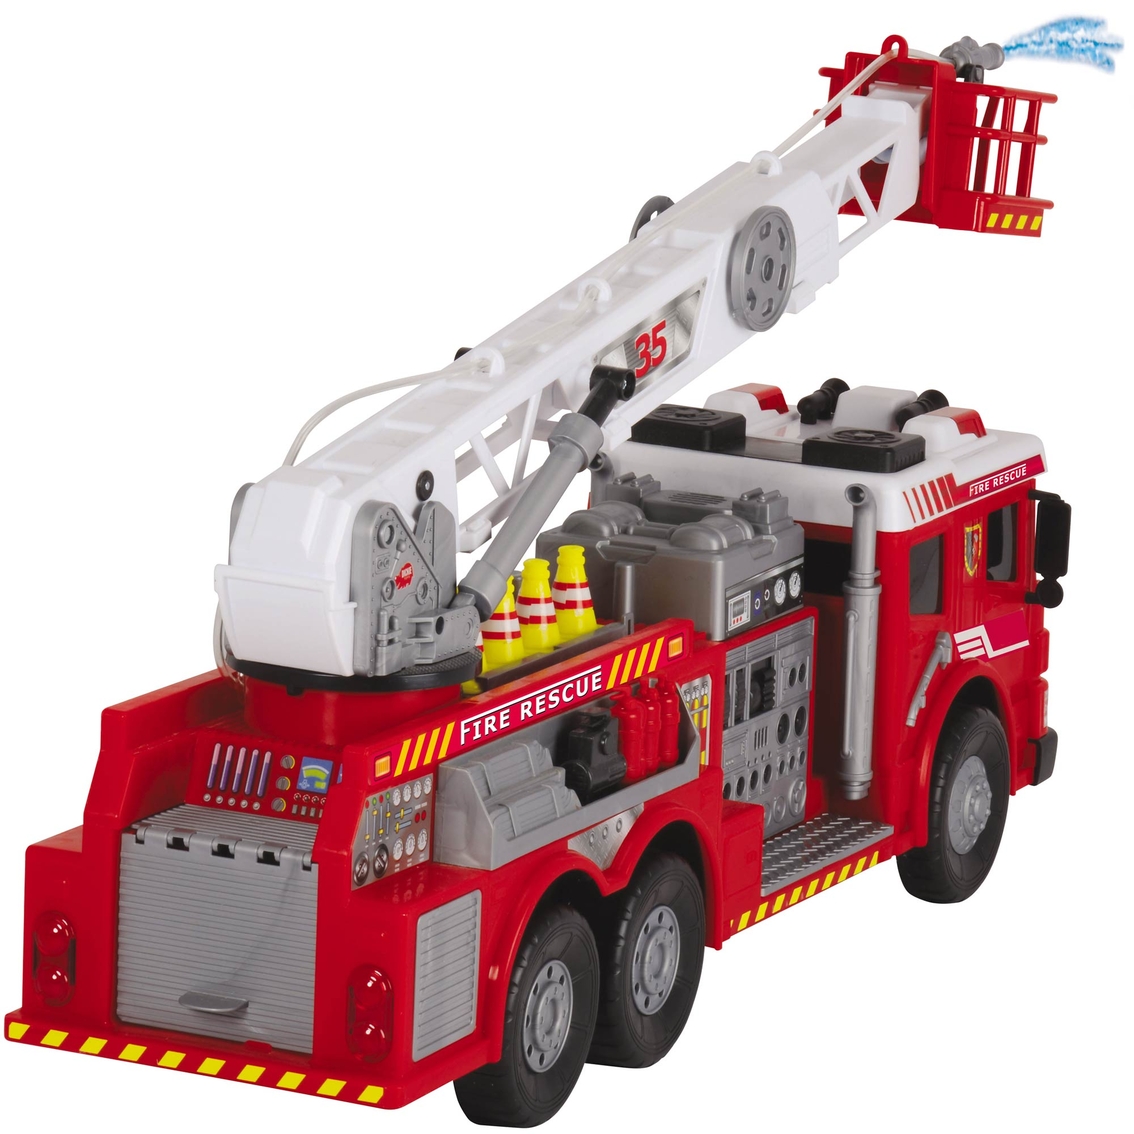 Dickie Fire Rescue Brigade - Image 4 of 4